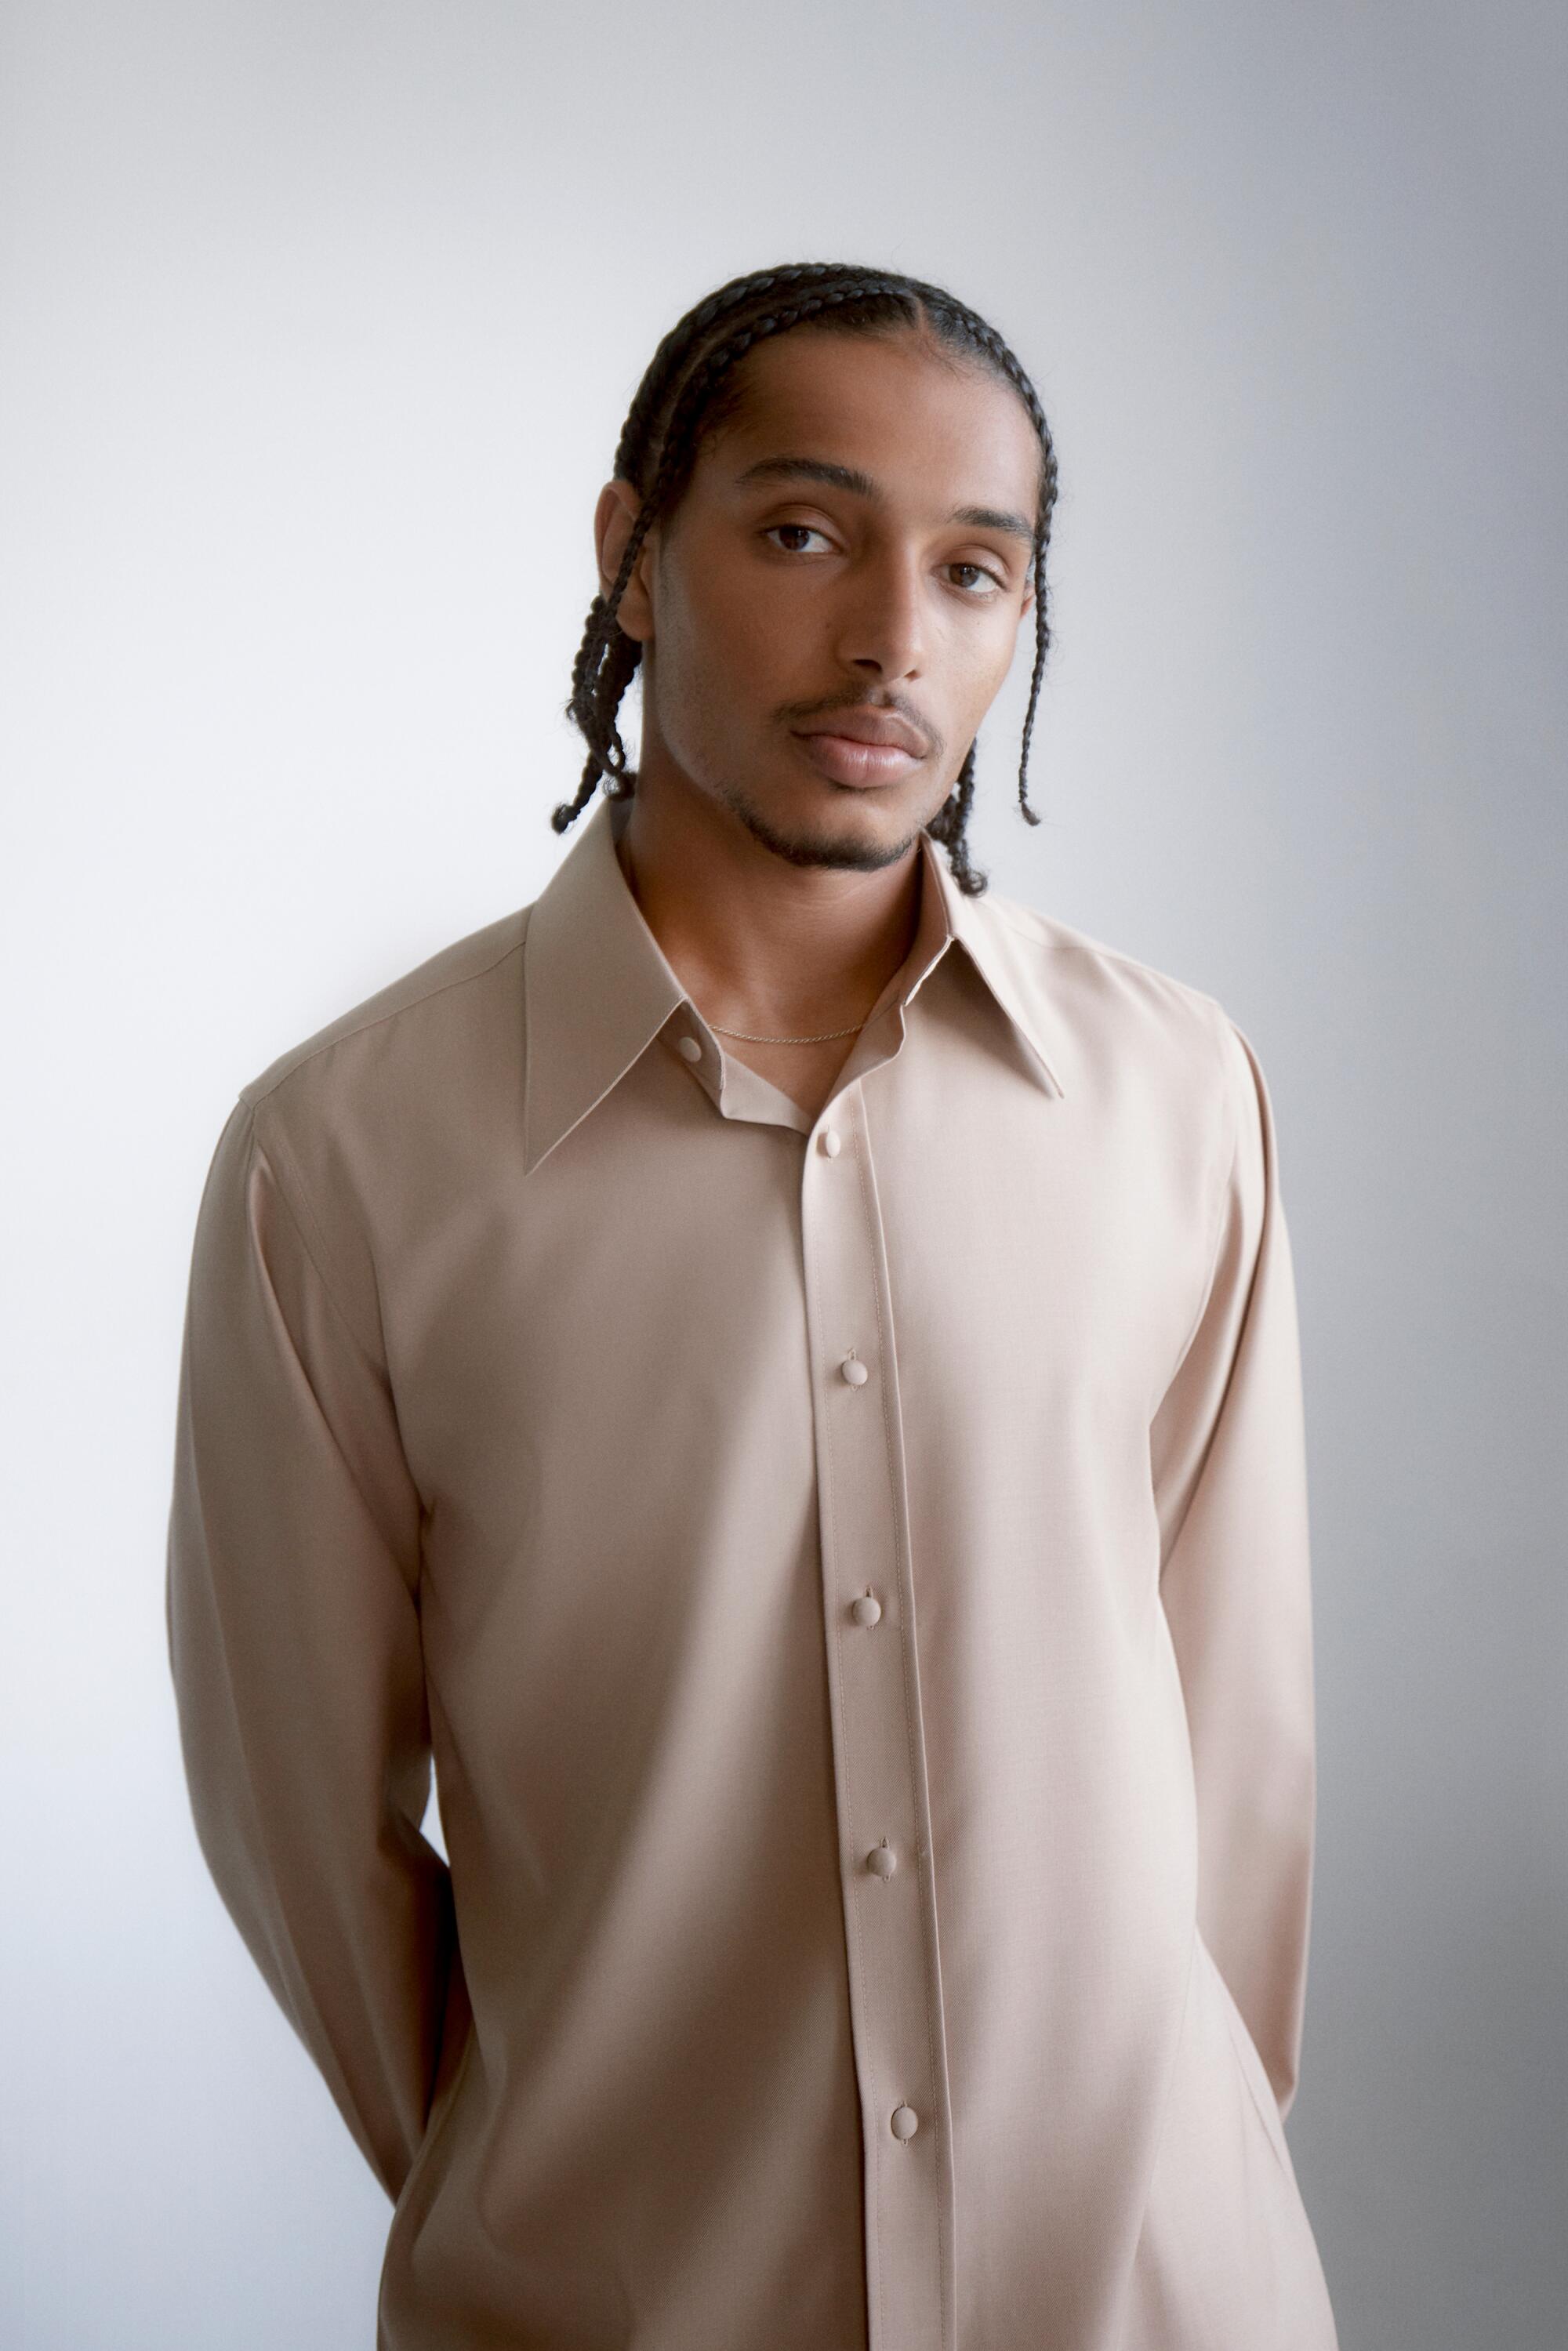 A male model wearing a beige collared shirt looks directly at the camera.